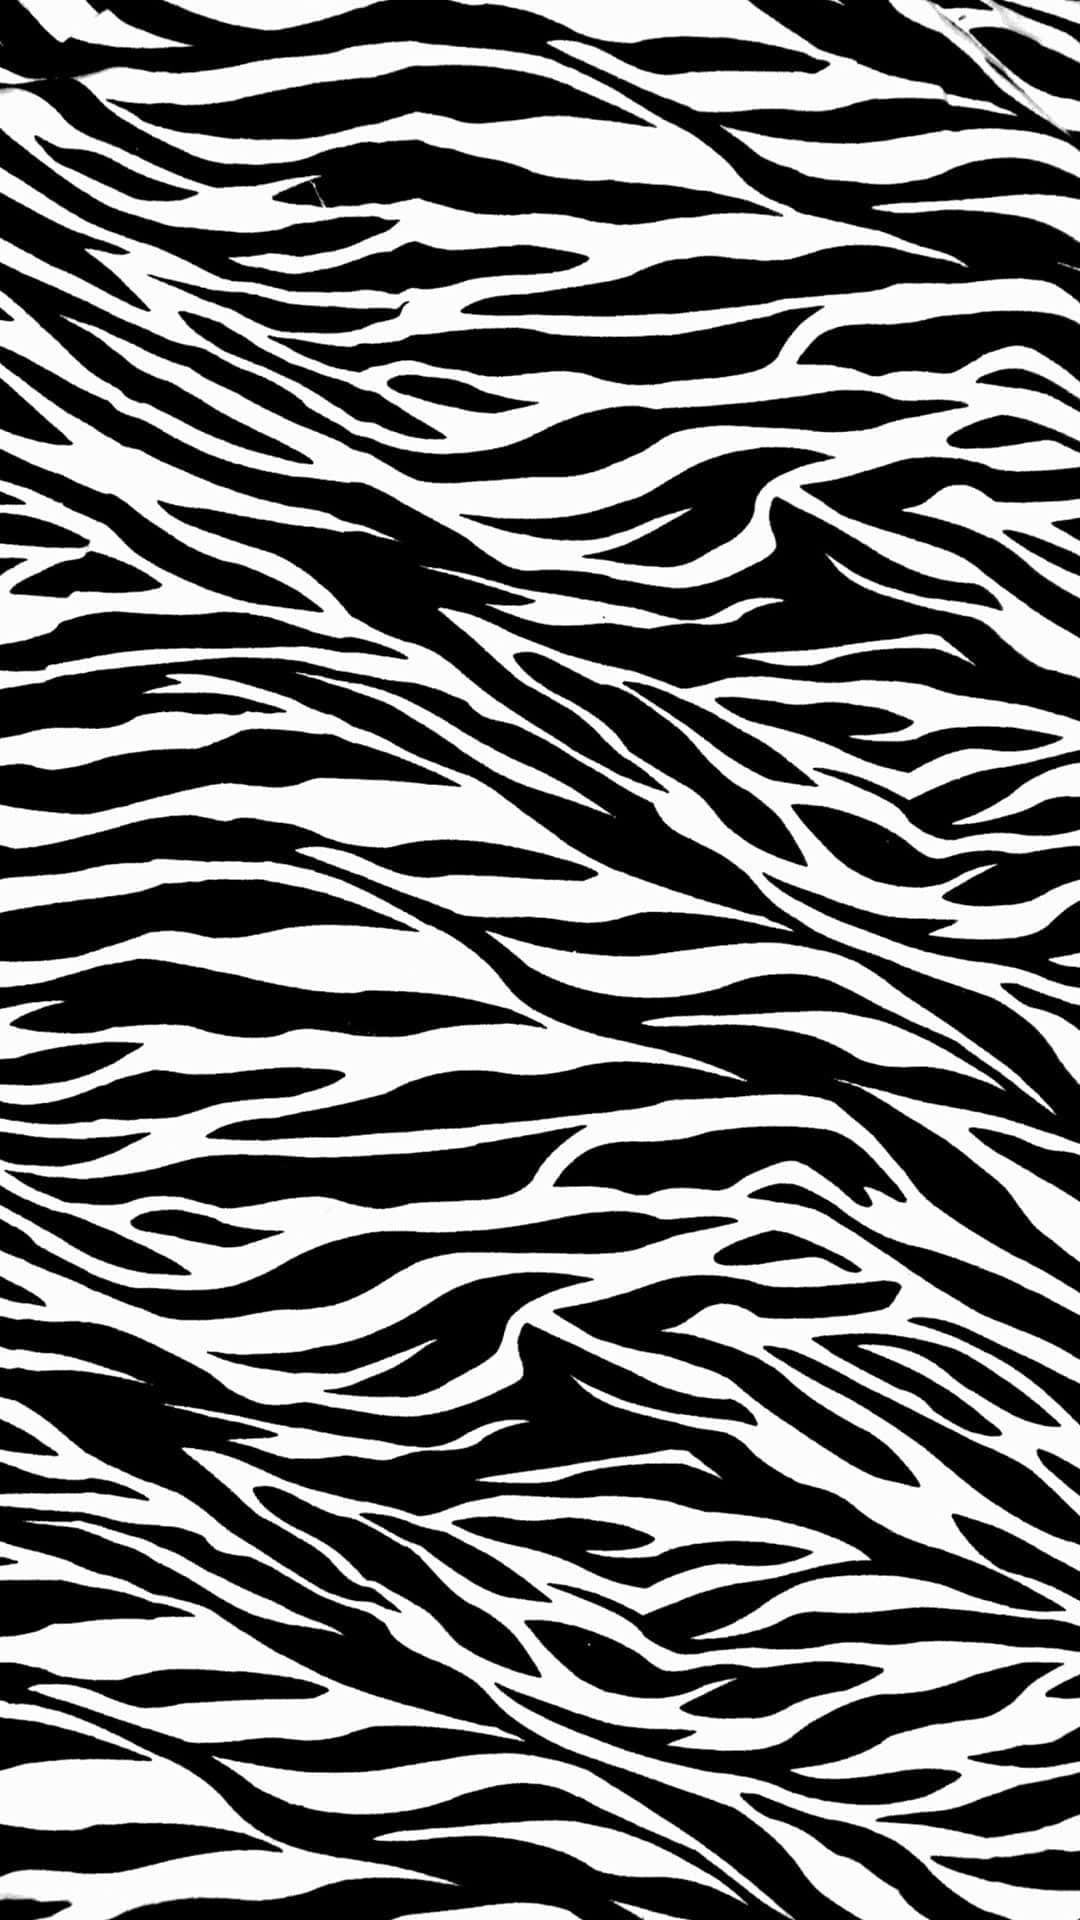 Stand out from the crowd with Animal Print iPhone Wallpaper